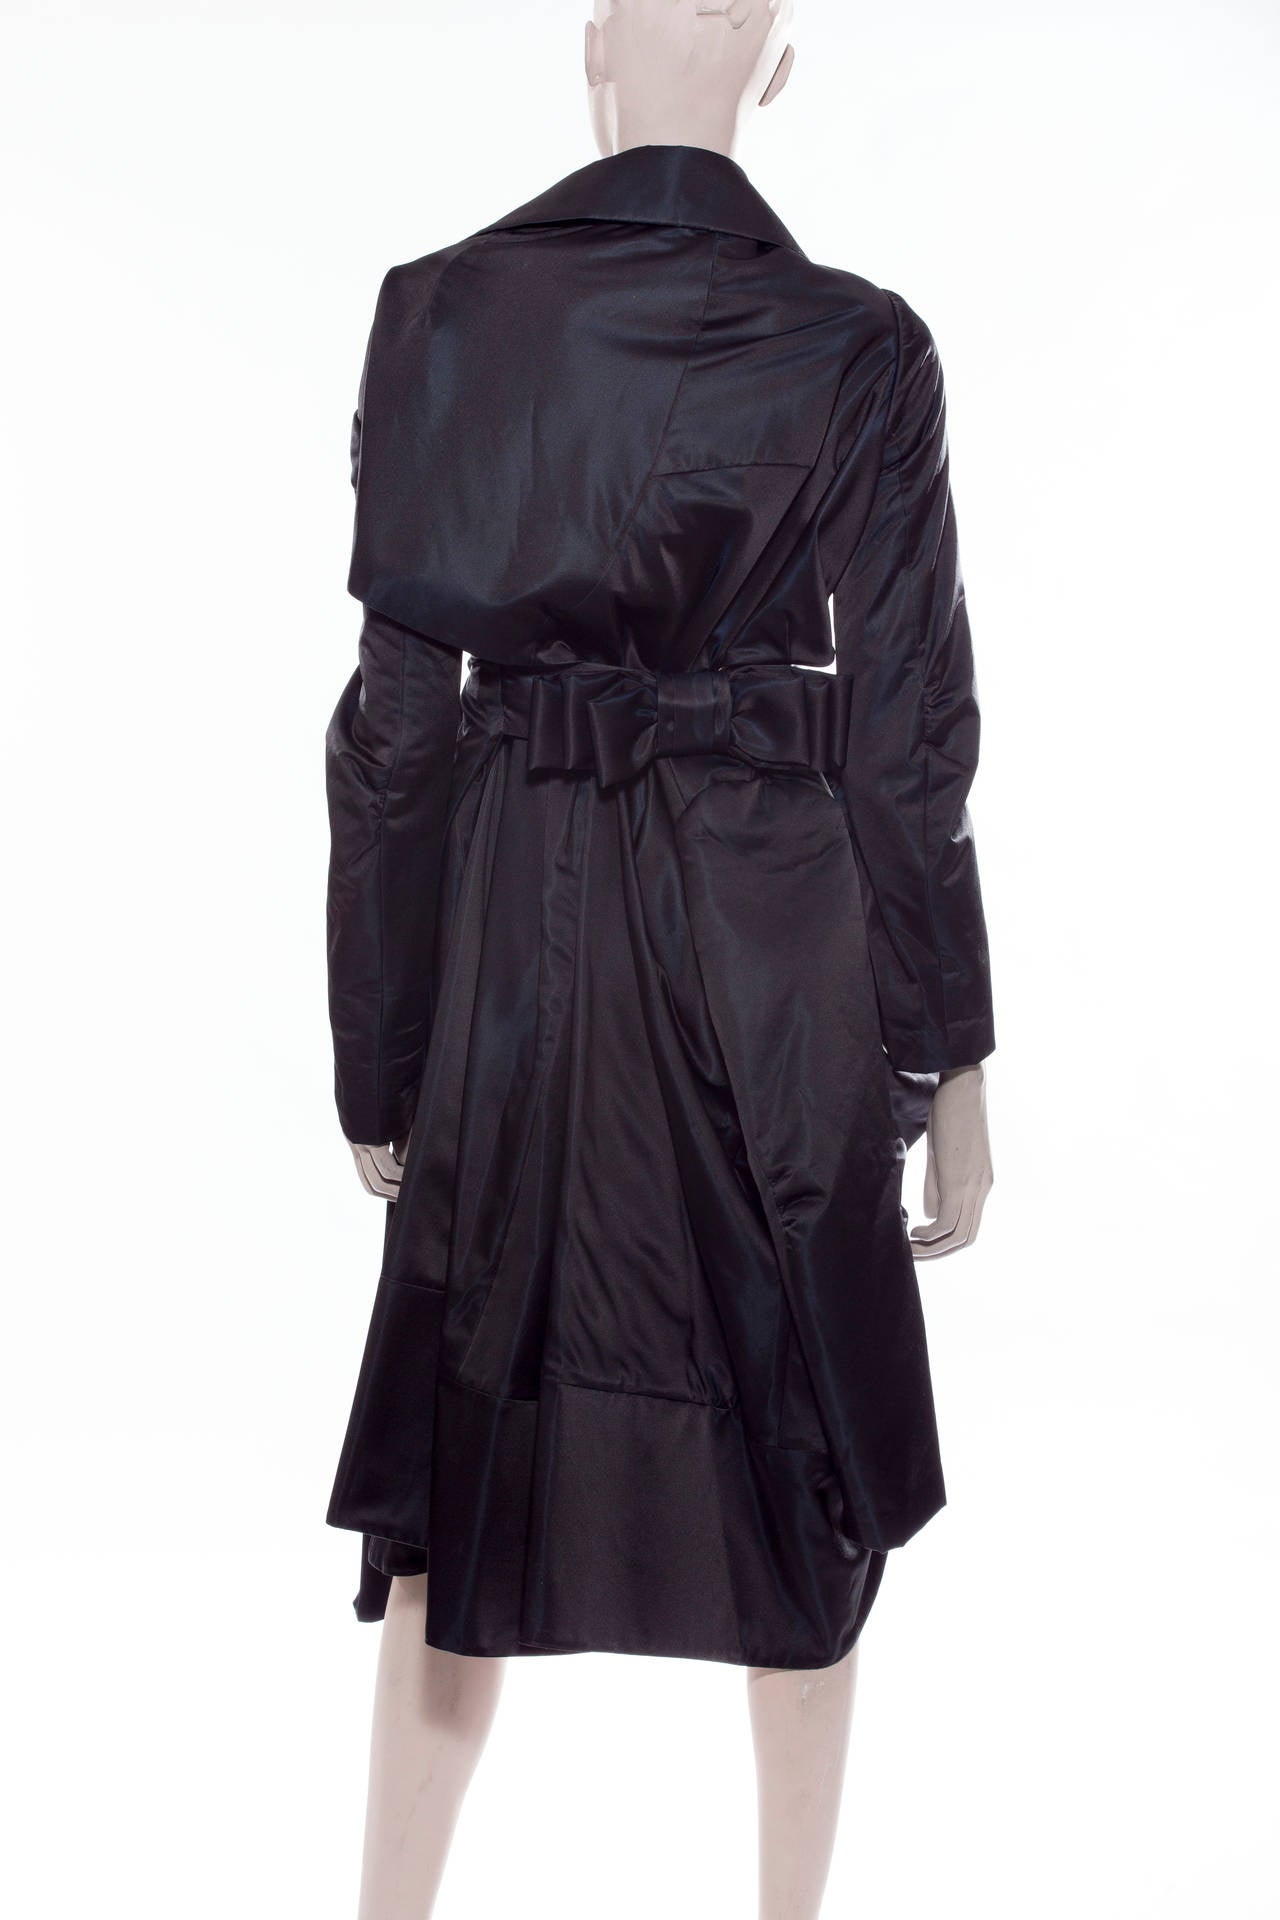 Commes des Garçons, Autumn/Winter 2004, black coat with long cuffed sleeves, slits at waist, cut outs featuring bow at center back, peter pan collar and hook and eye closures at center front.
Bust 40